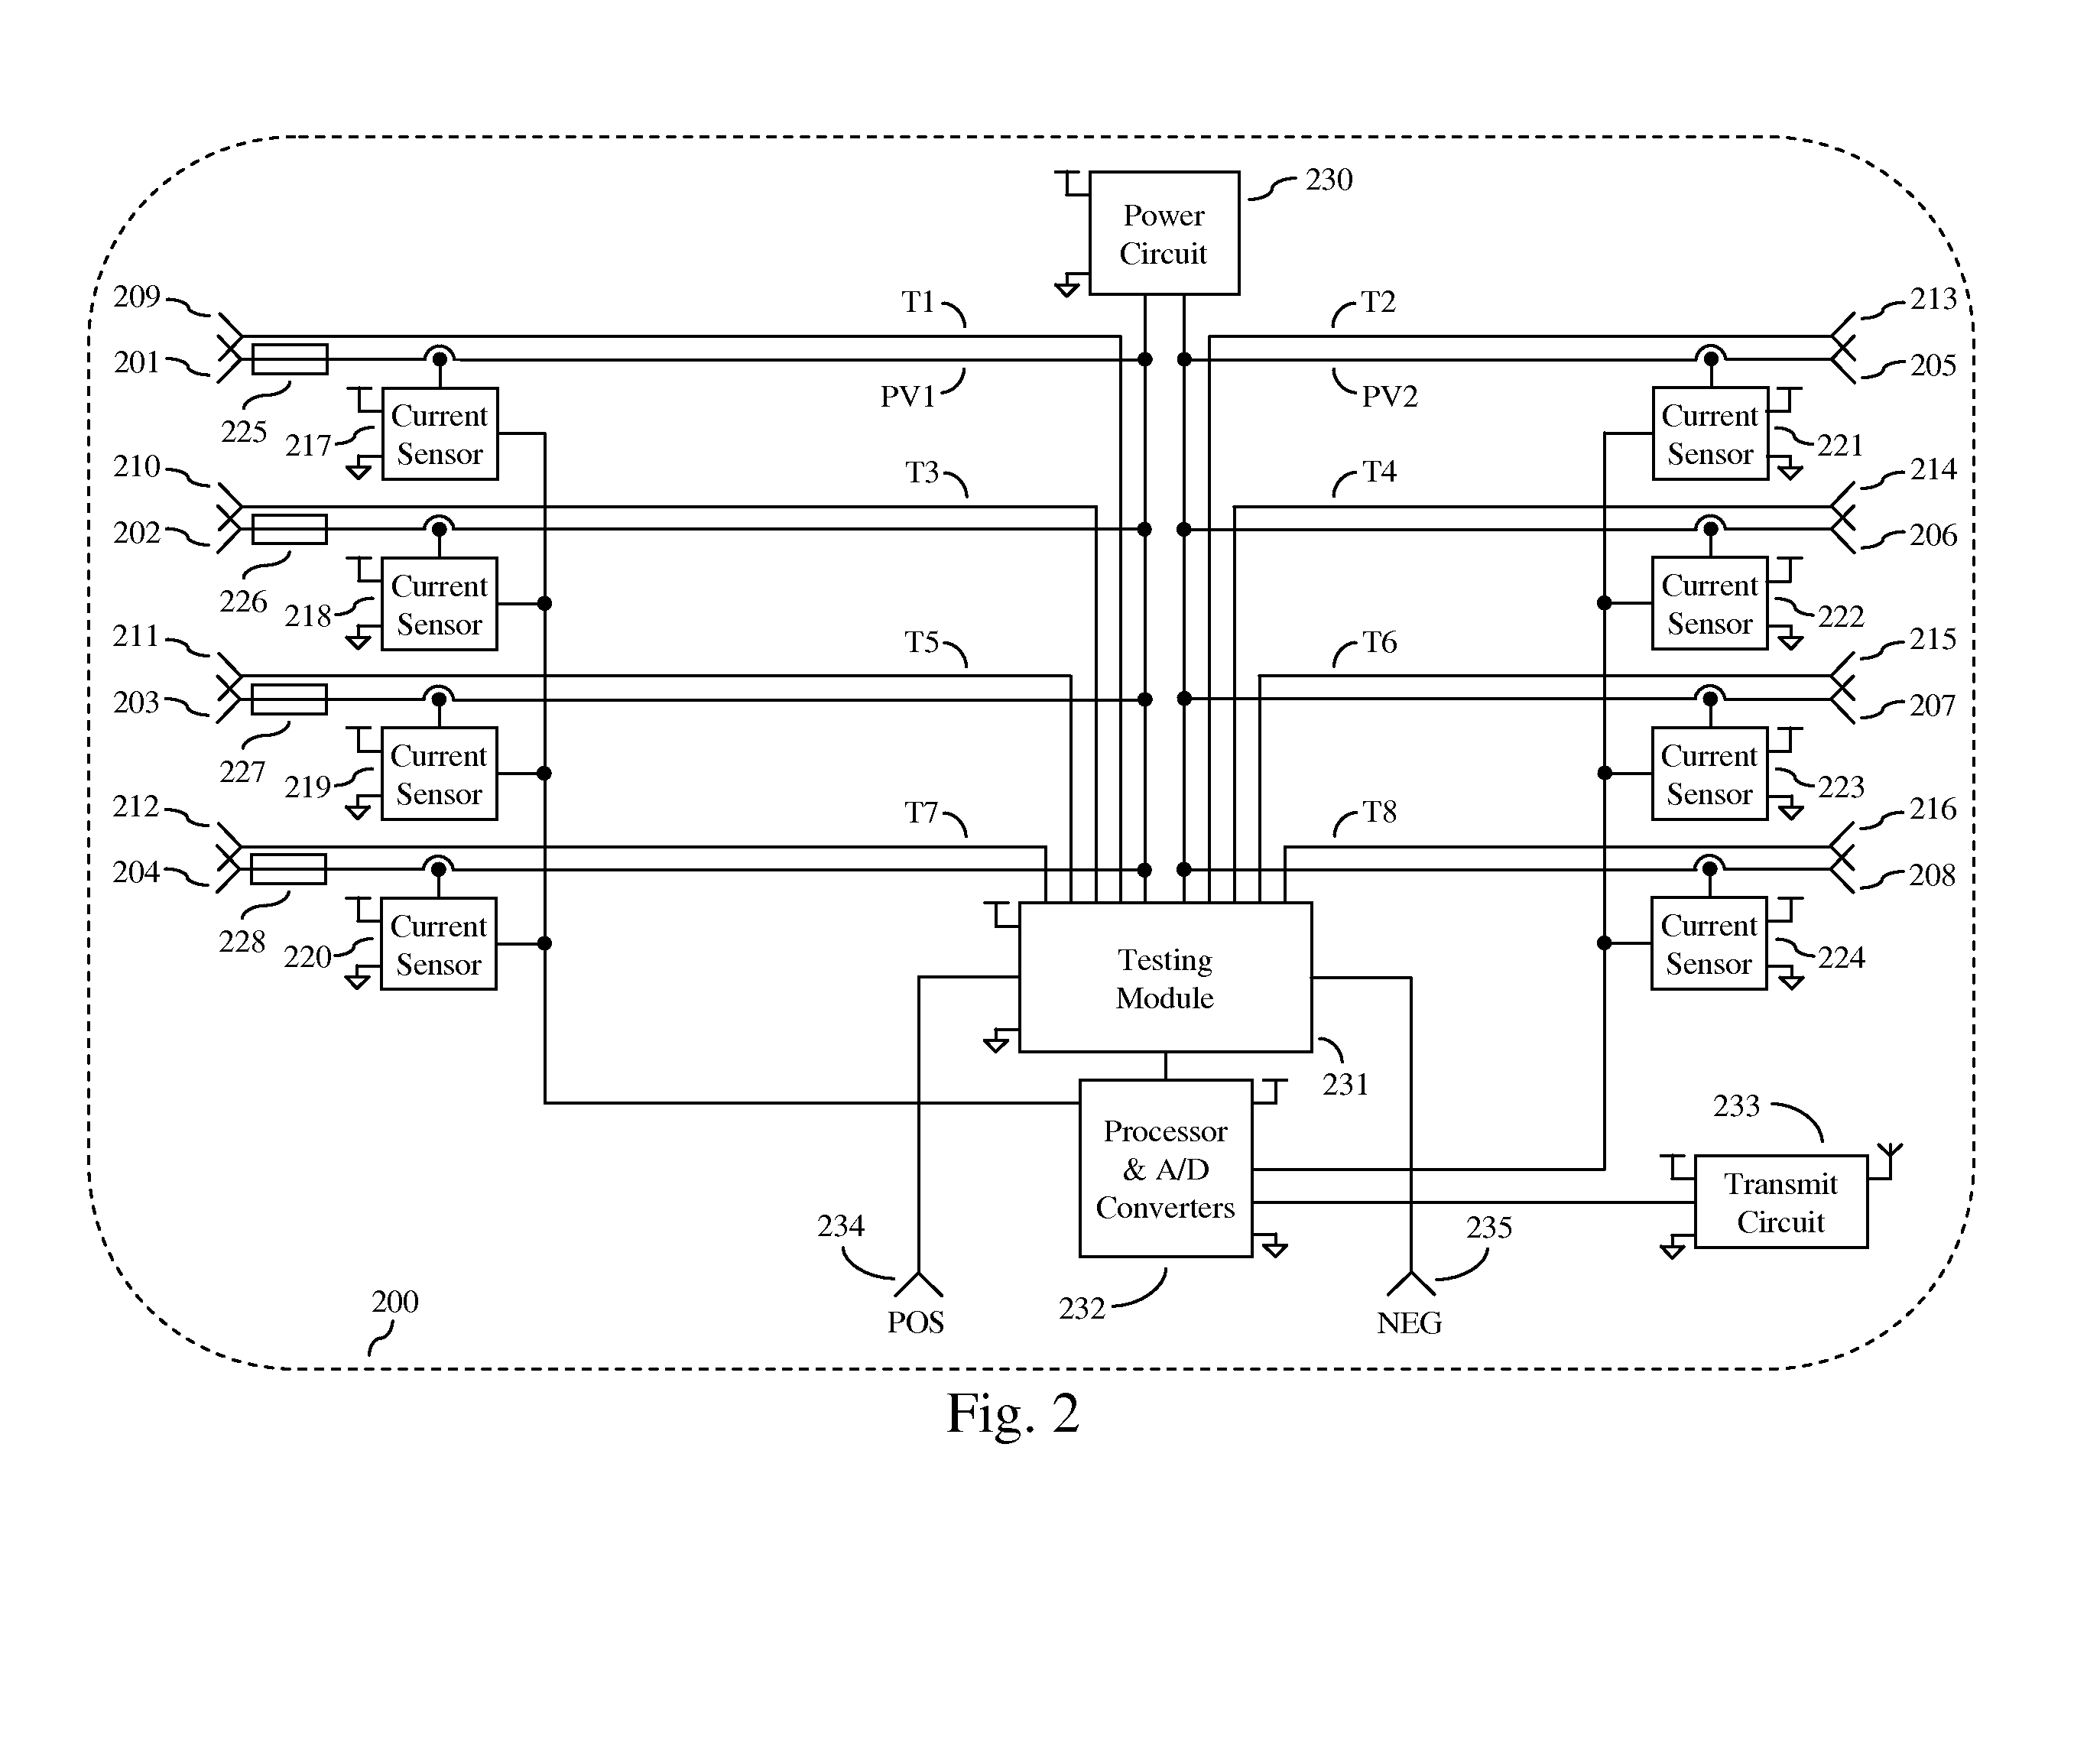 Active and passive monitoring system for installed photovoltaic strings, substrings, and modules